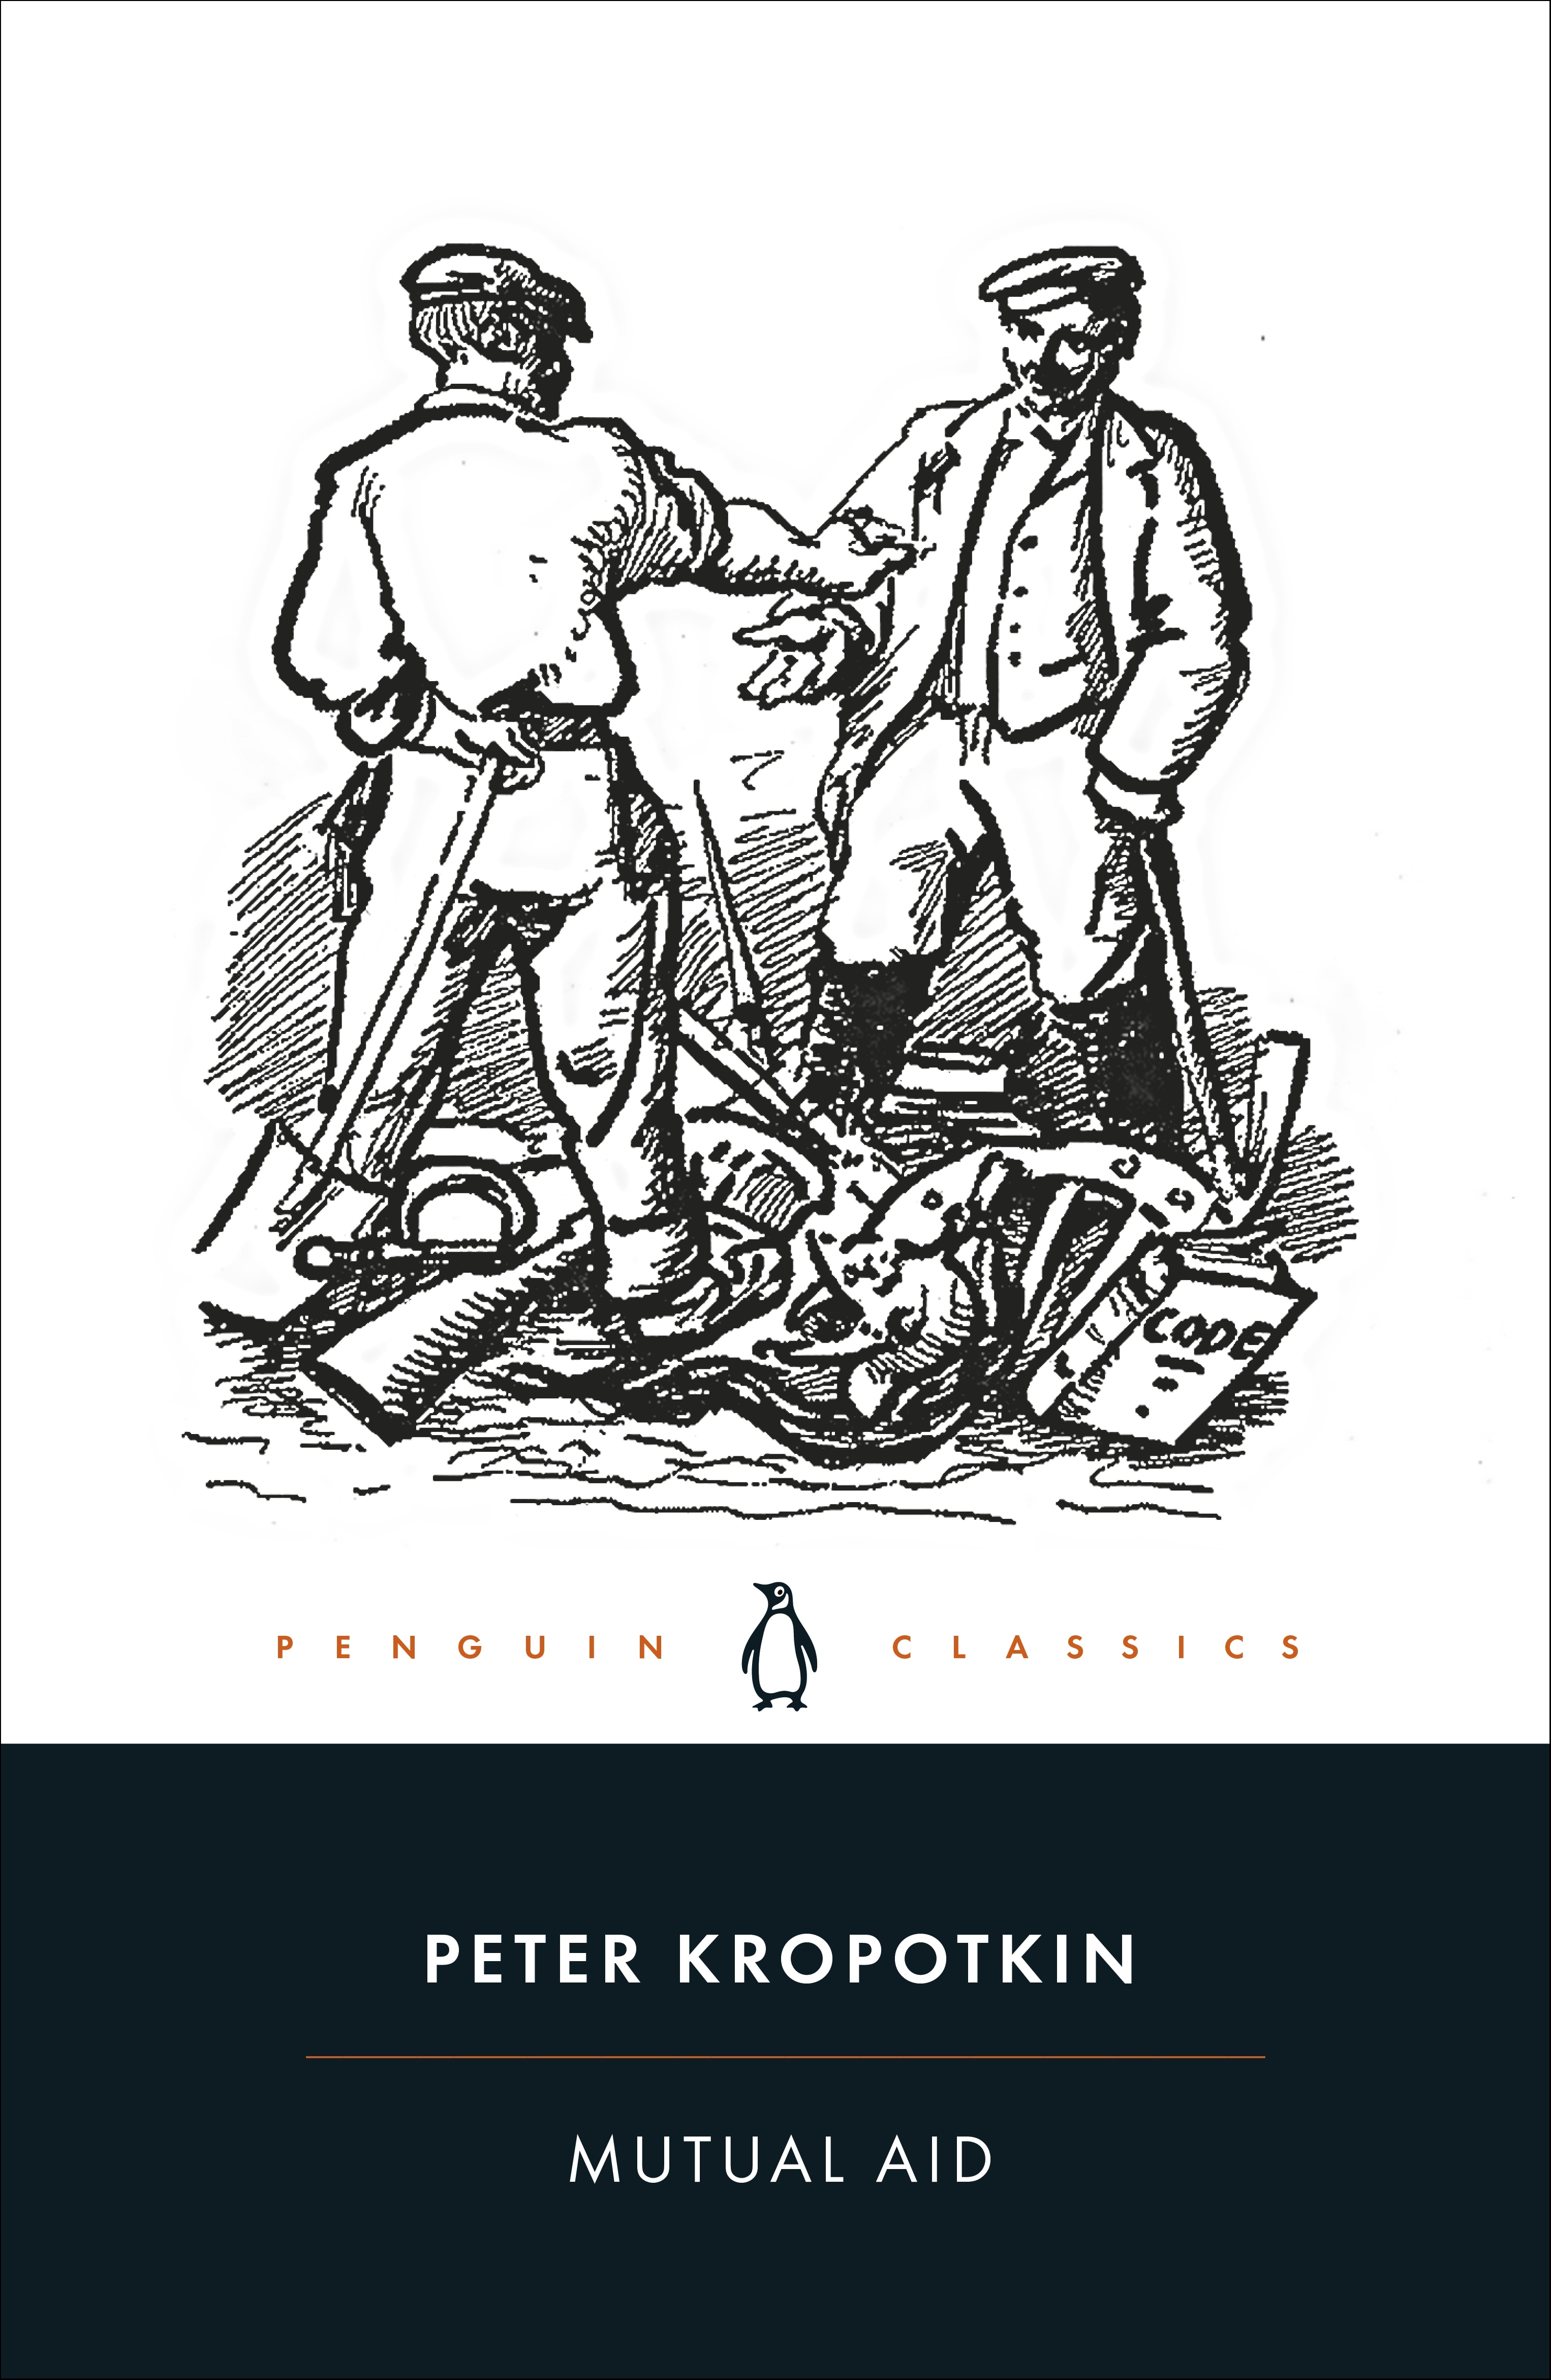 Book “Mutual Aid” by Peter Kropotkin — September 29, 2022